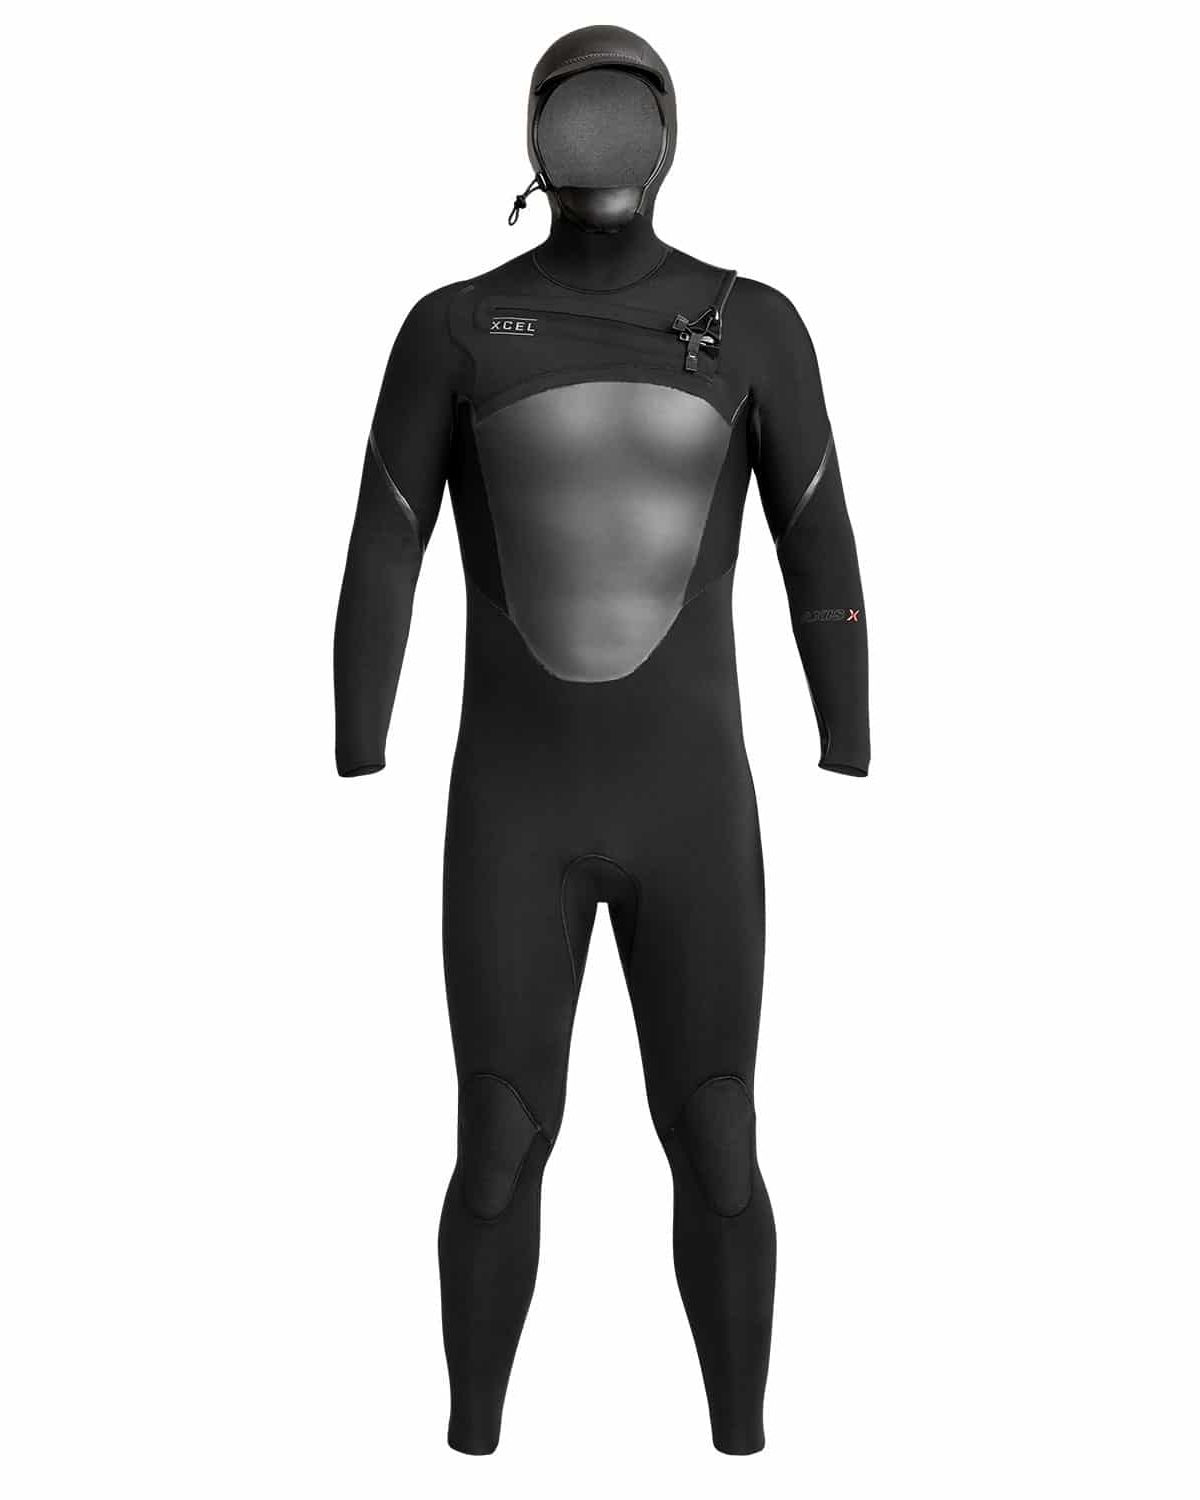 Wetsuit 5/4 Axis X Hooded Wetsuit - Black